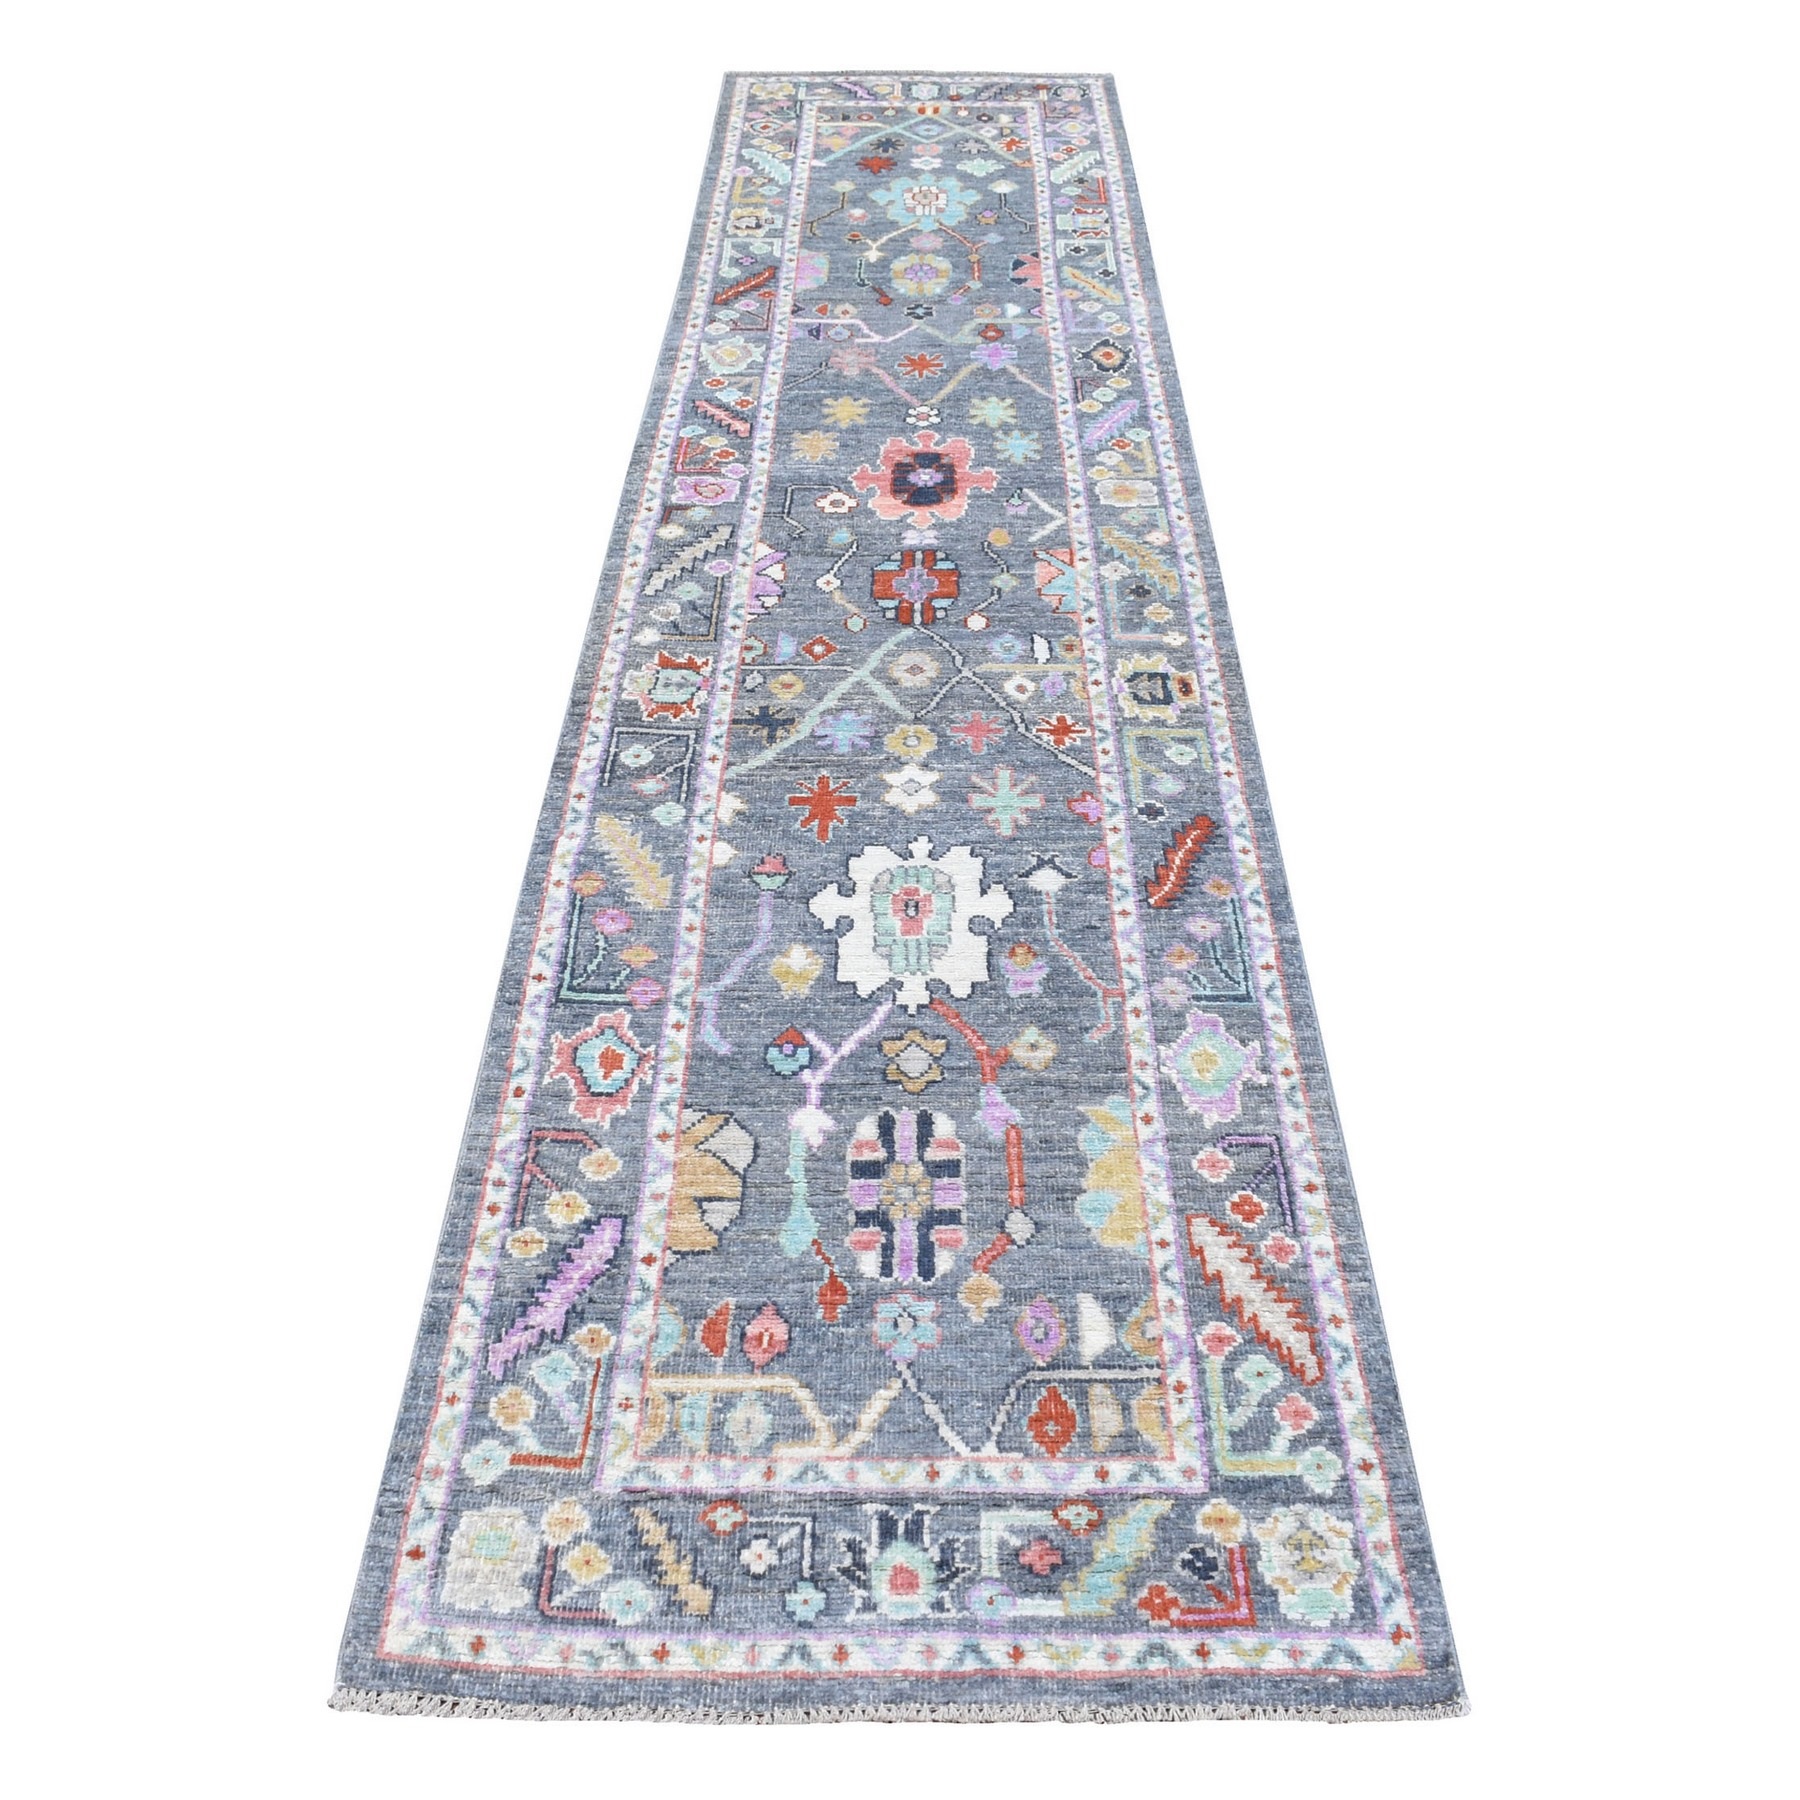 2'8"x11'7" 100% Wool Angora Oushak Gray with Colorful Motifs Hand Woven Oriental Runner Rug 